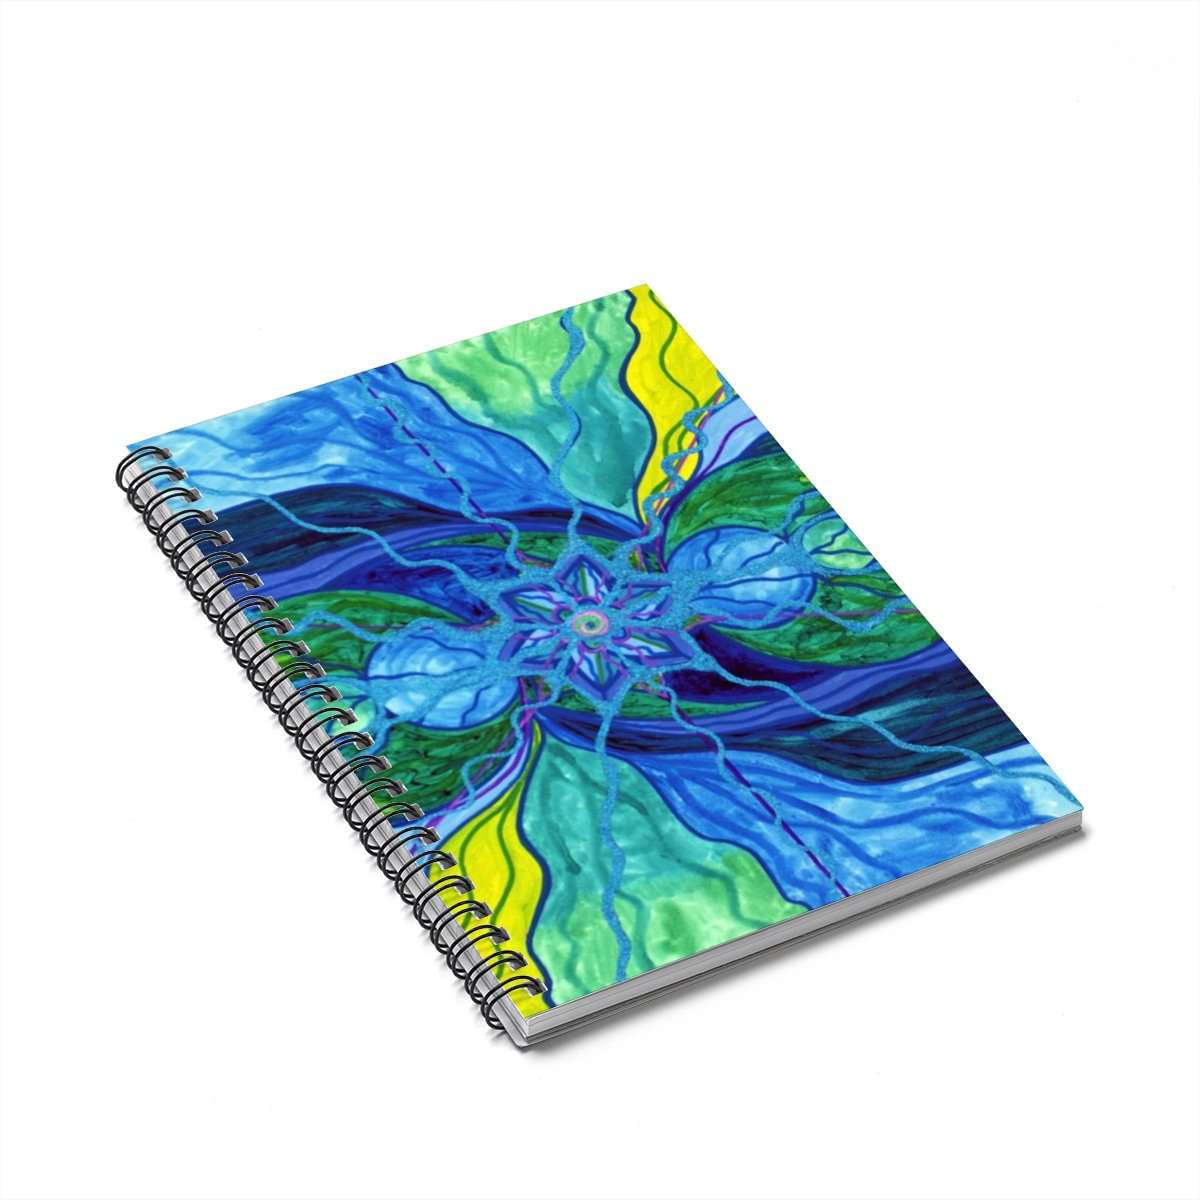 Tranquility - Spiral Notebook